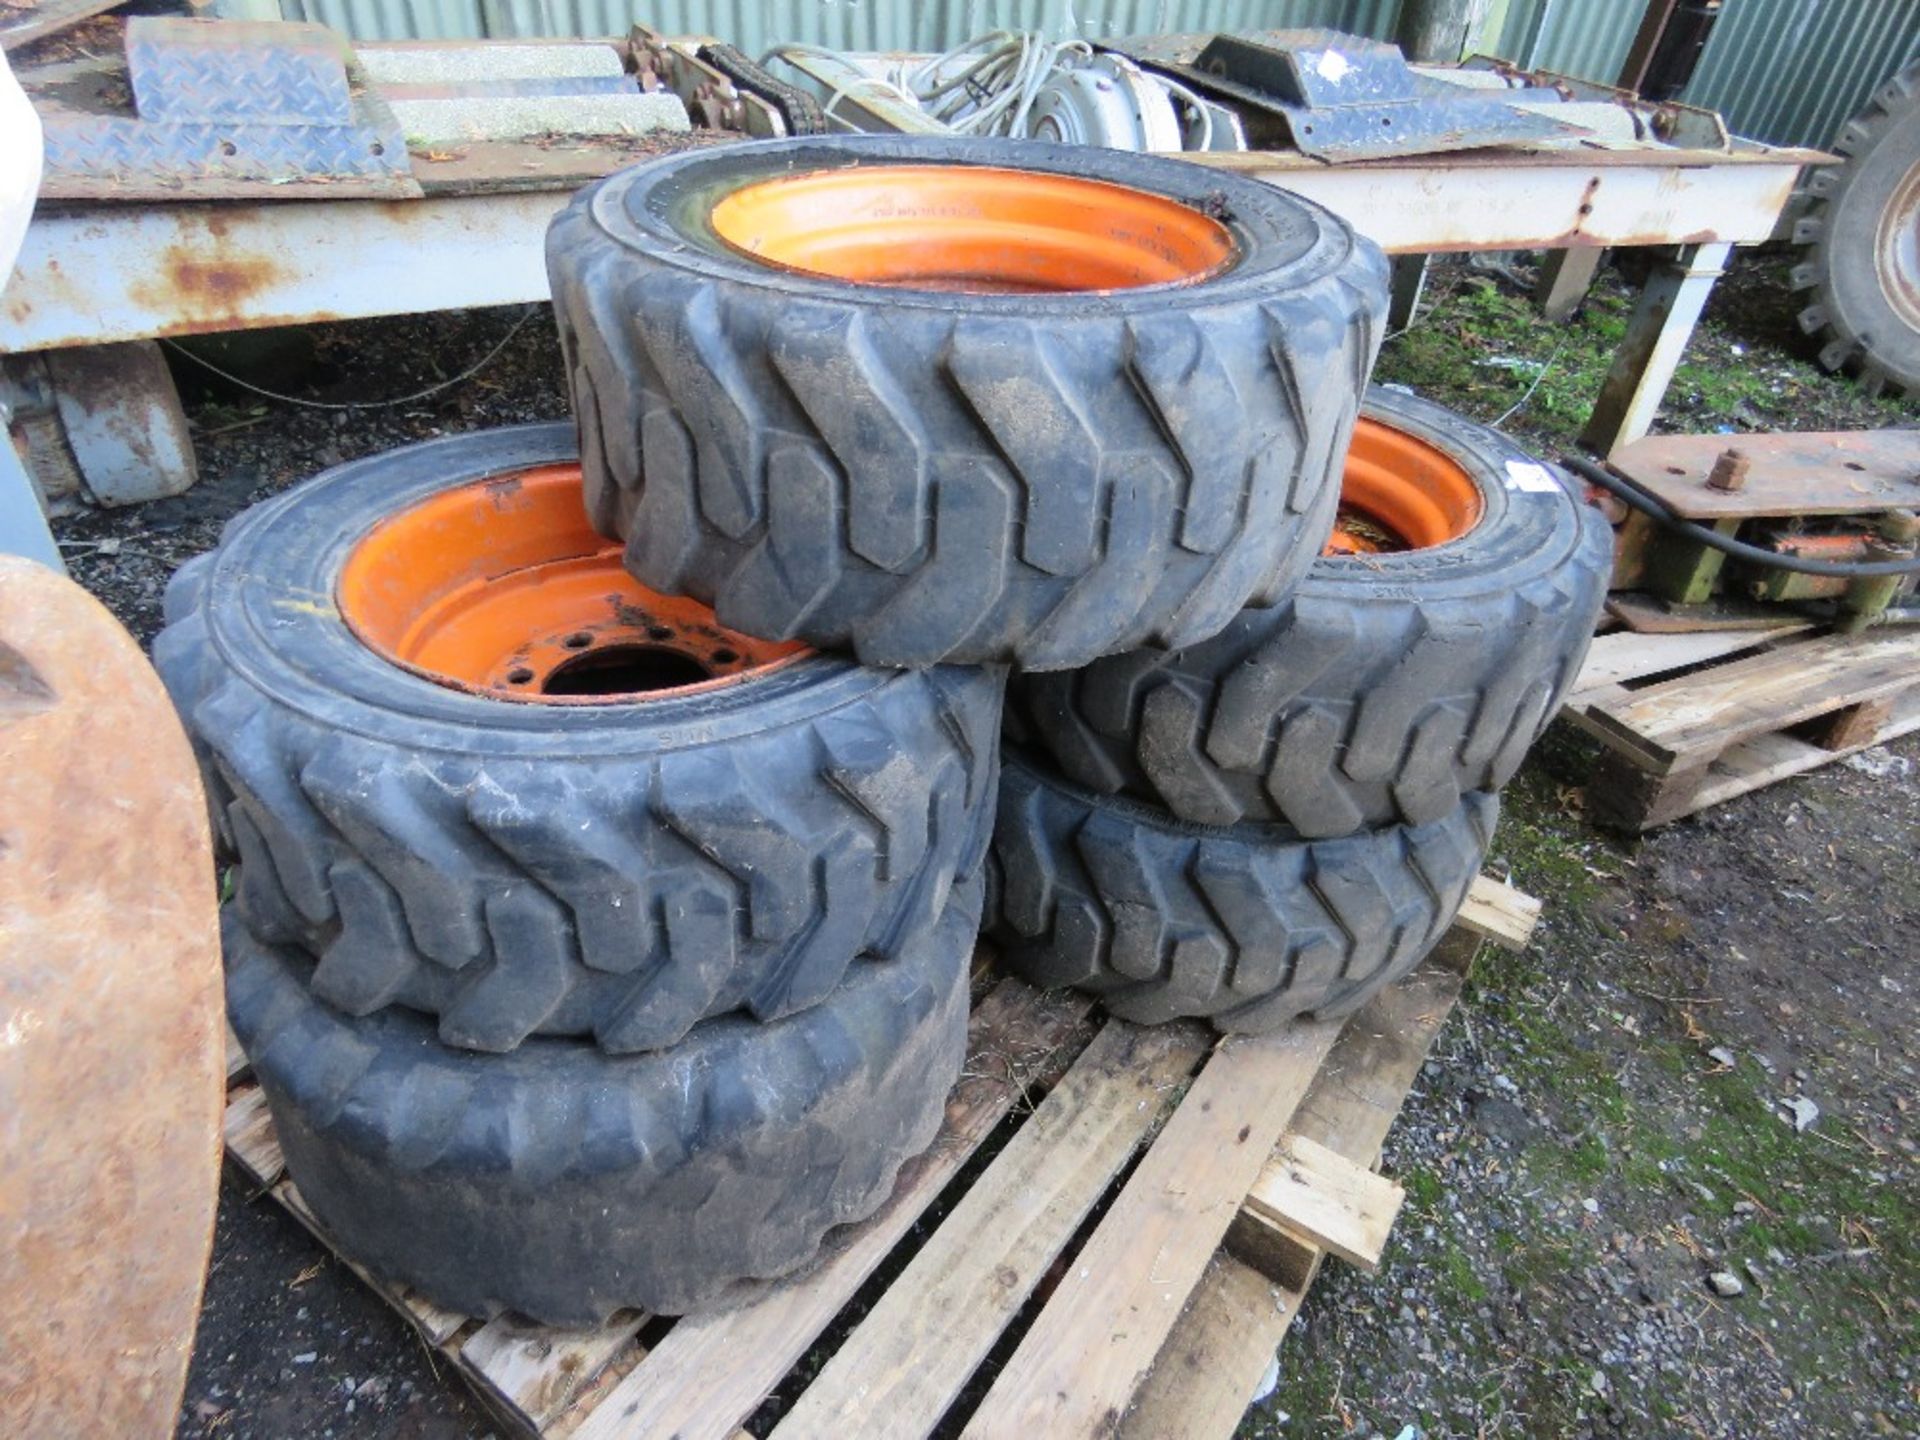 5NO SKID STEER LOADER WHEELS AND TYRES 10-16.5 SIZE. DIRECT FROM LOCAL SMALLHOLDING. THIS LOT IS - Image 2 of 5